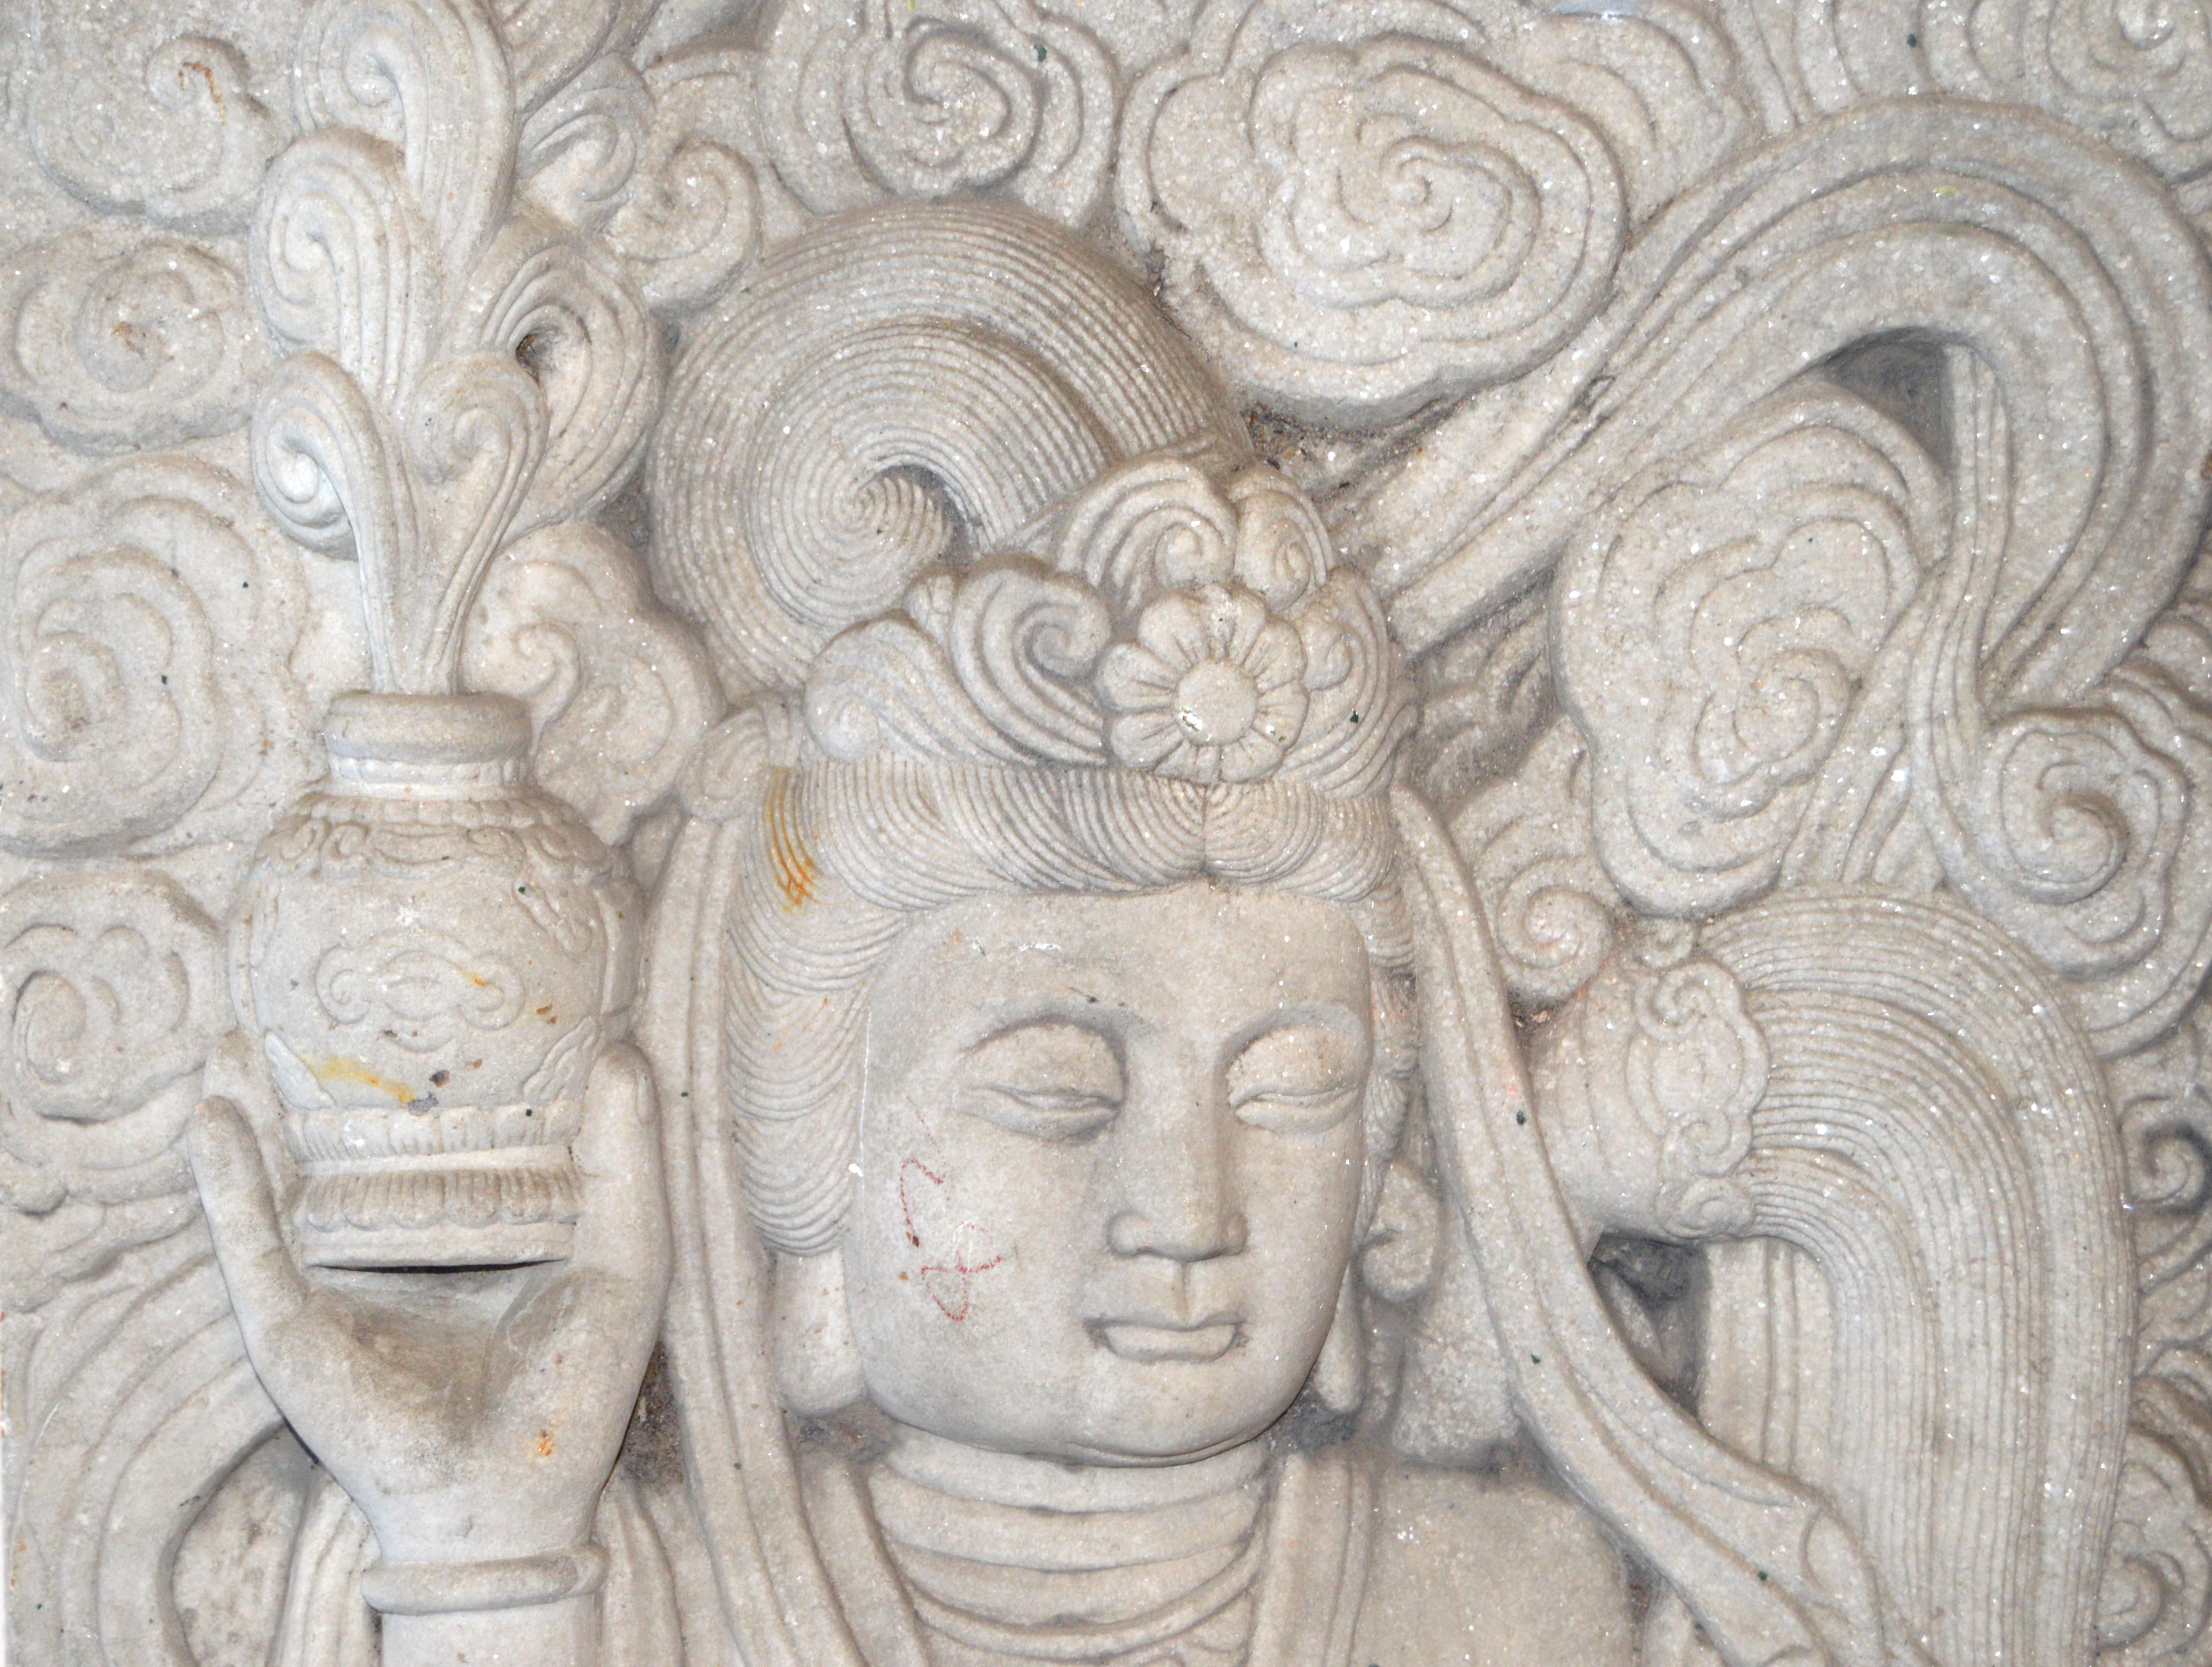 A large Chinese vintage hand-carved white stone Buddhist temple sculpture of a bodhisattva. This large size Chinese sculpture was carved from a white stone and showcases a bodhisattva holding a perfume pot. A bodhisattva is someone capable of